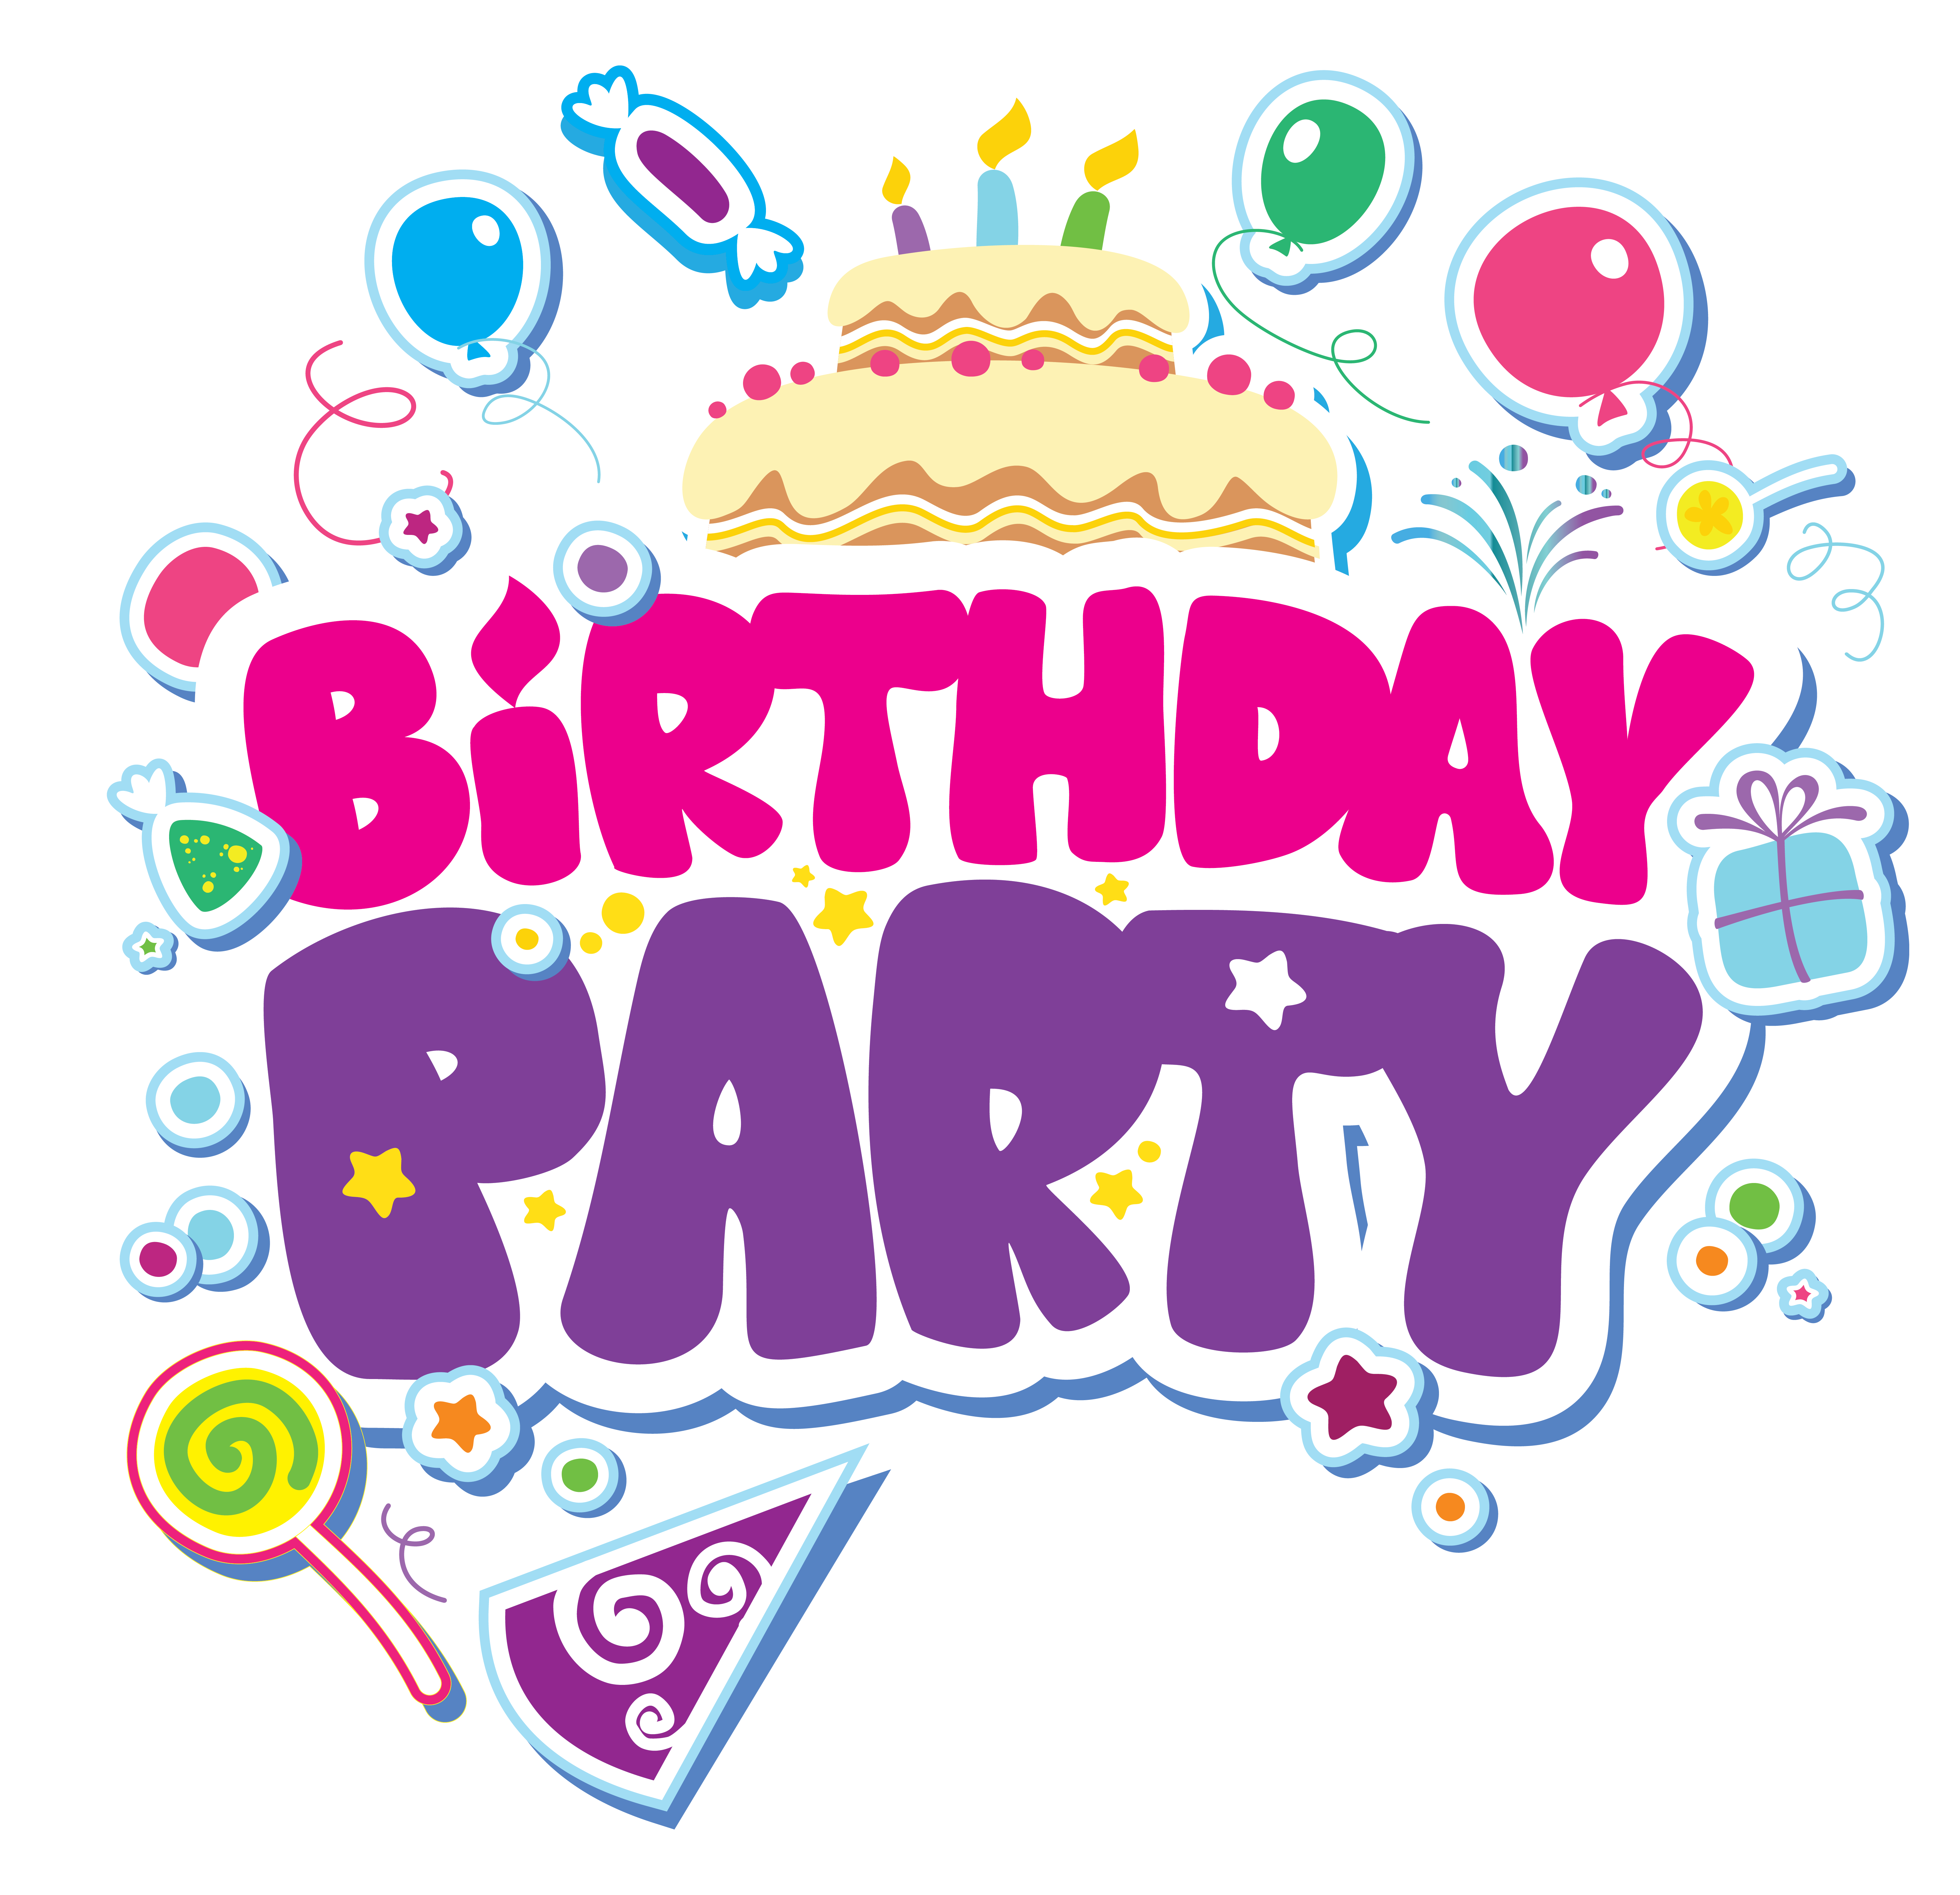 Birthday party clipart - Clipground